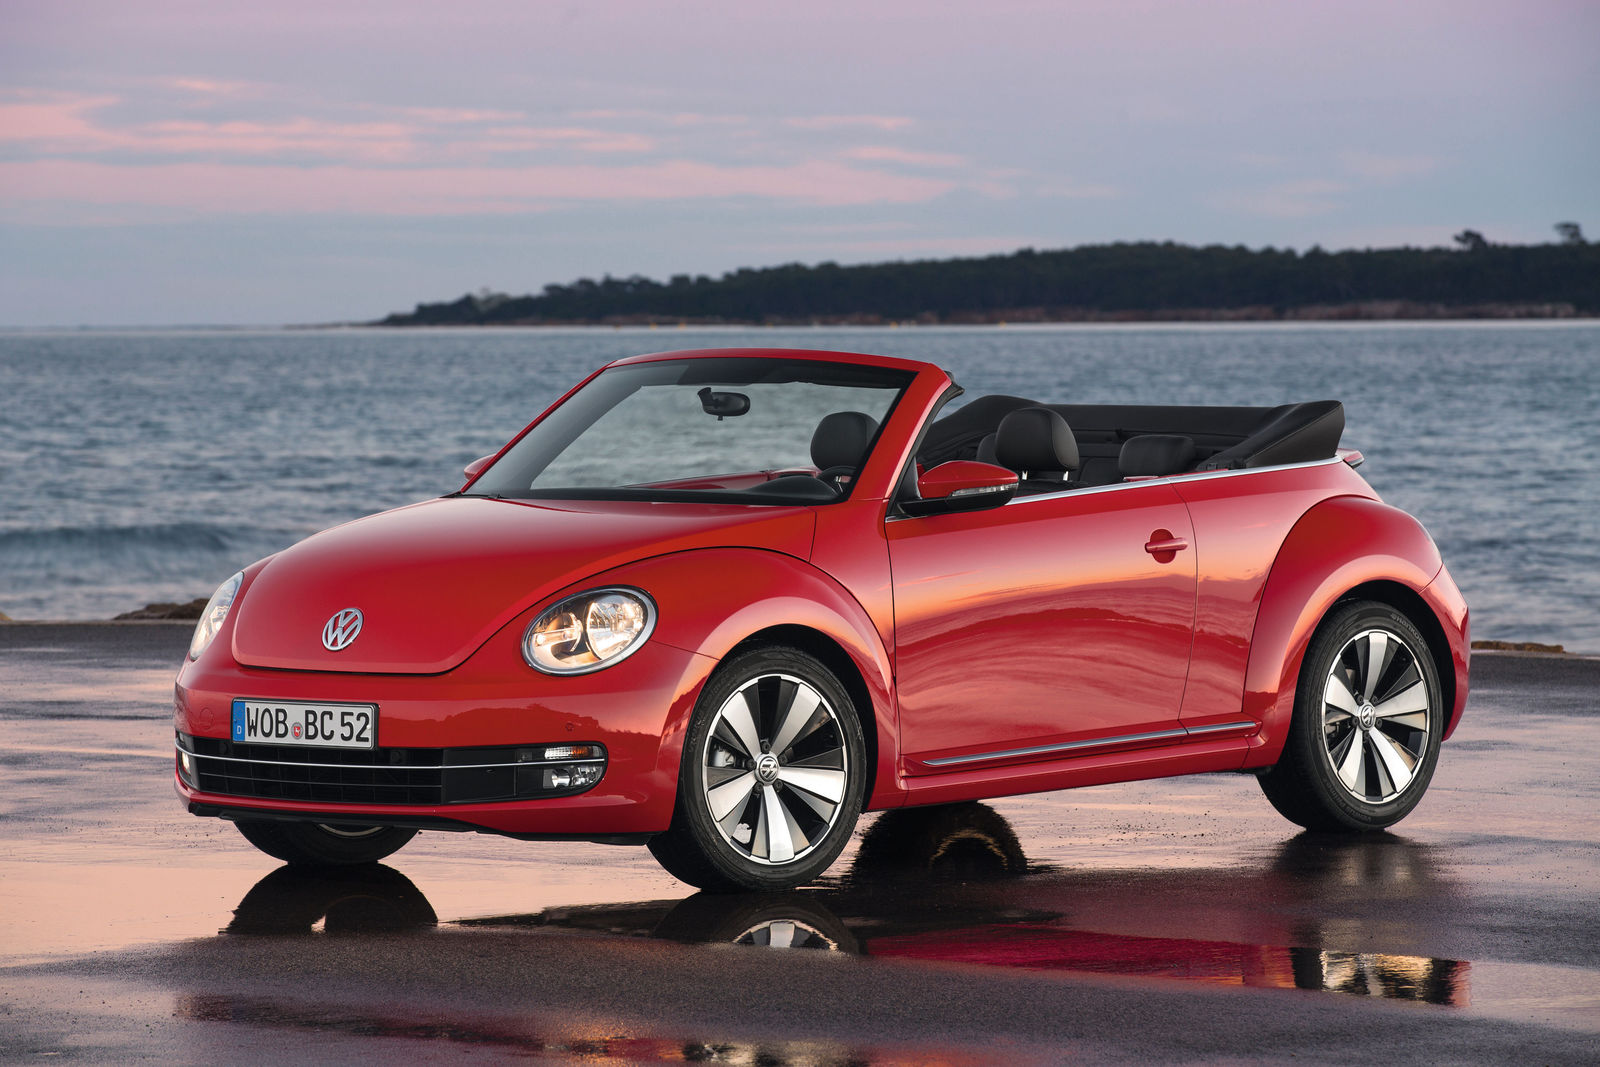 The new Beetle Cabriolet